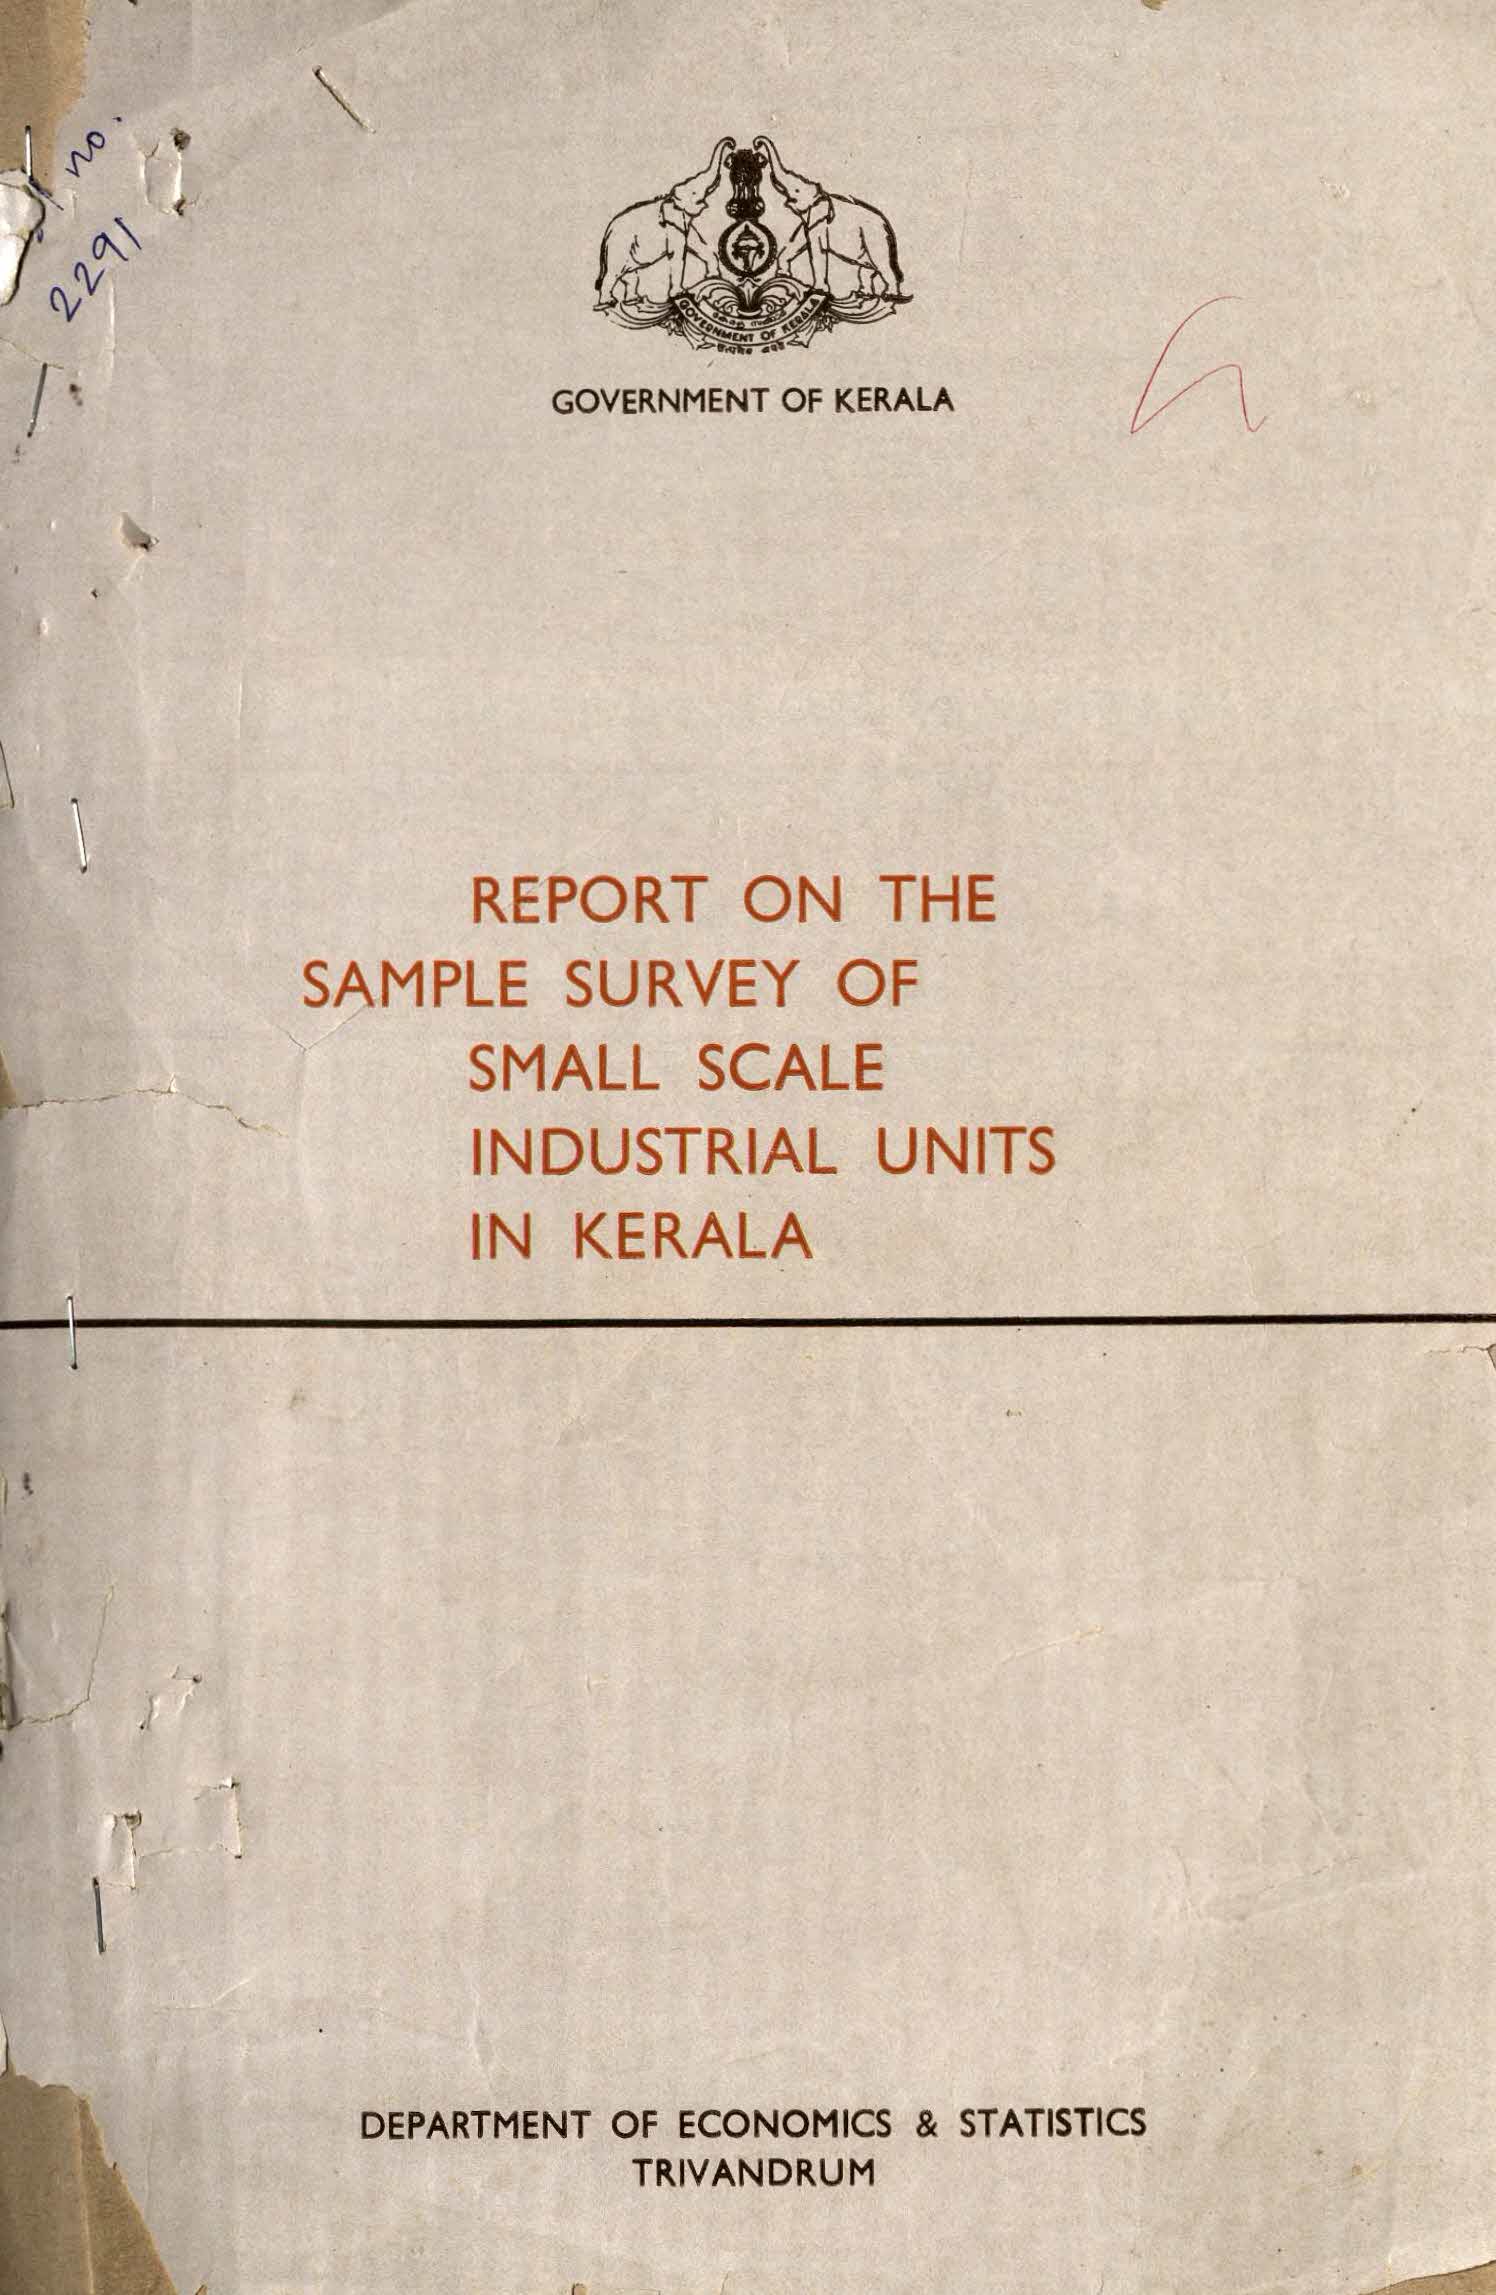 REPORT ON SAMPLE SURVEY OF SMALL SCALE INDUSTRIAL UNITS IN KERALA